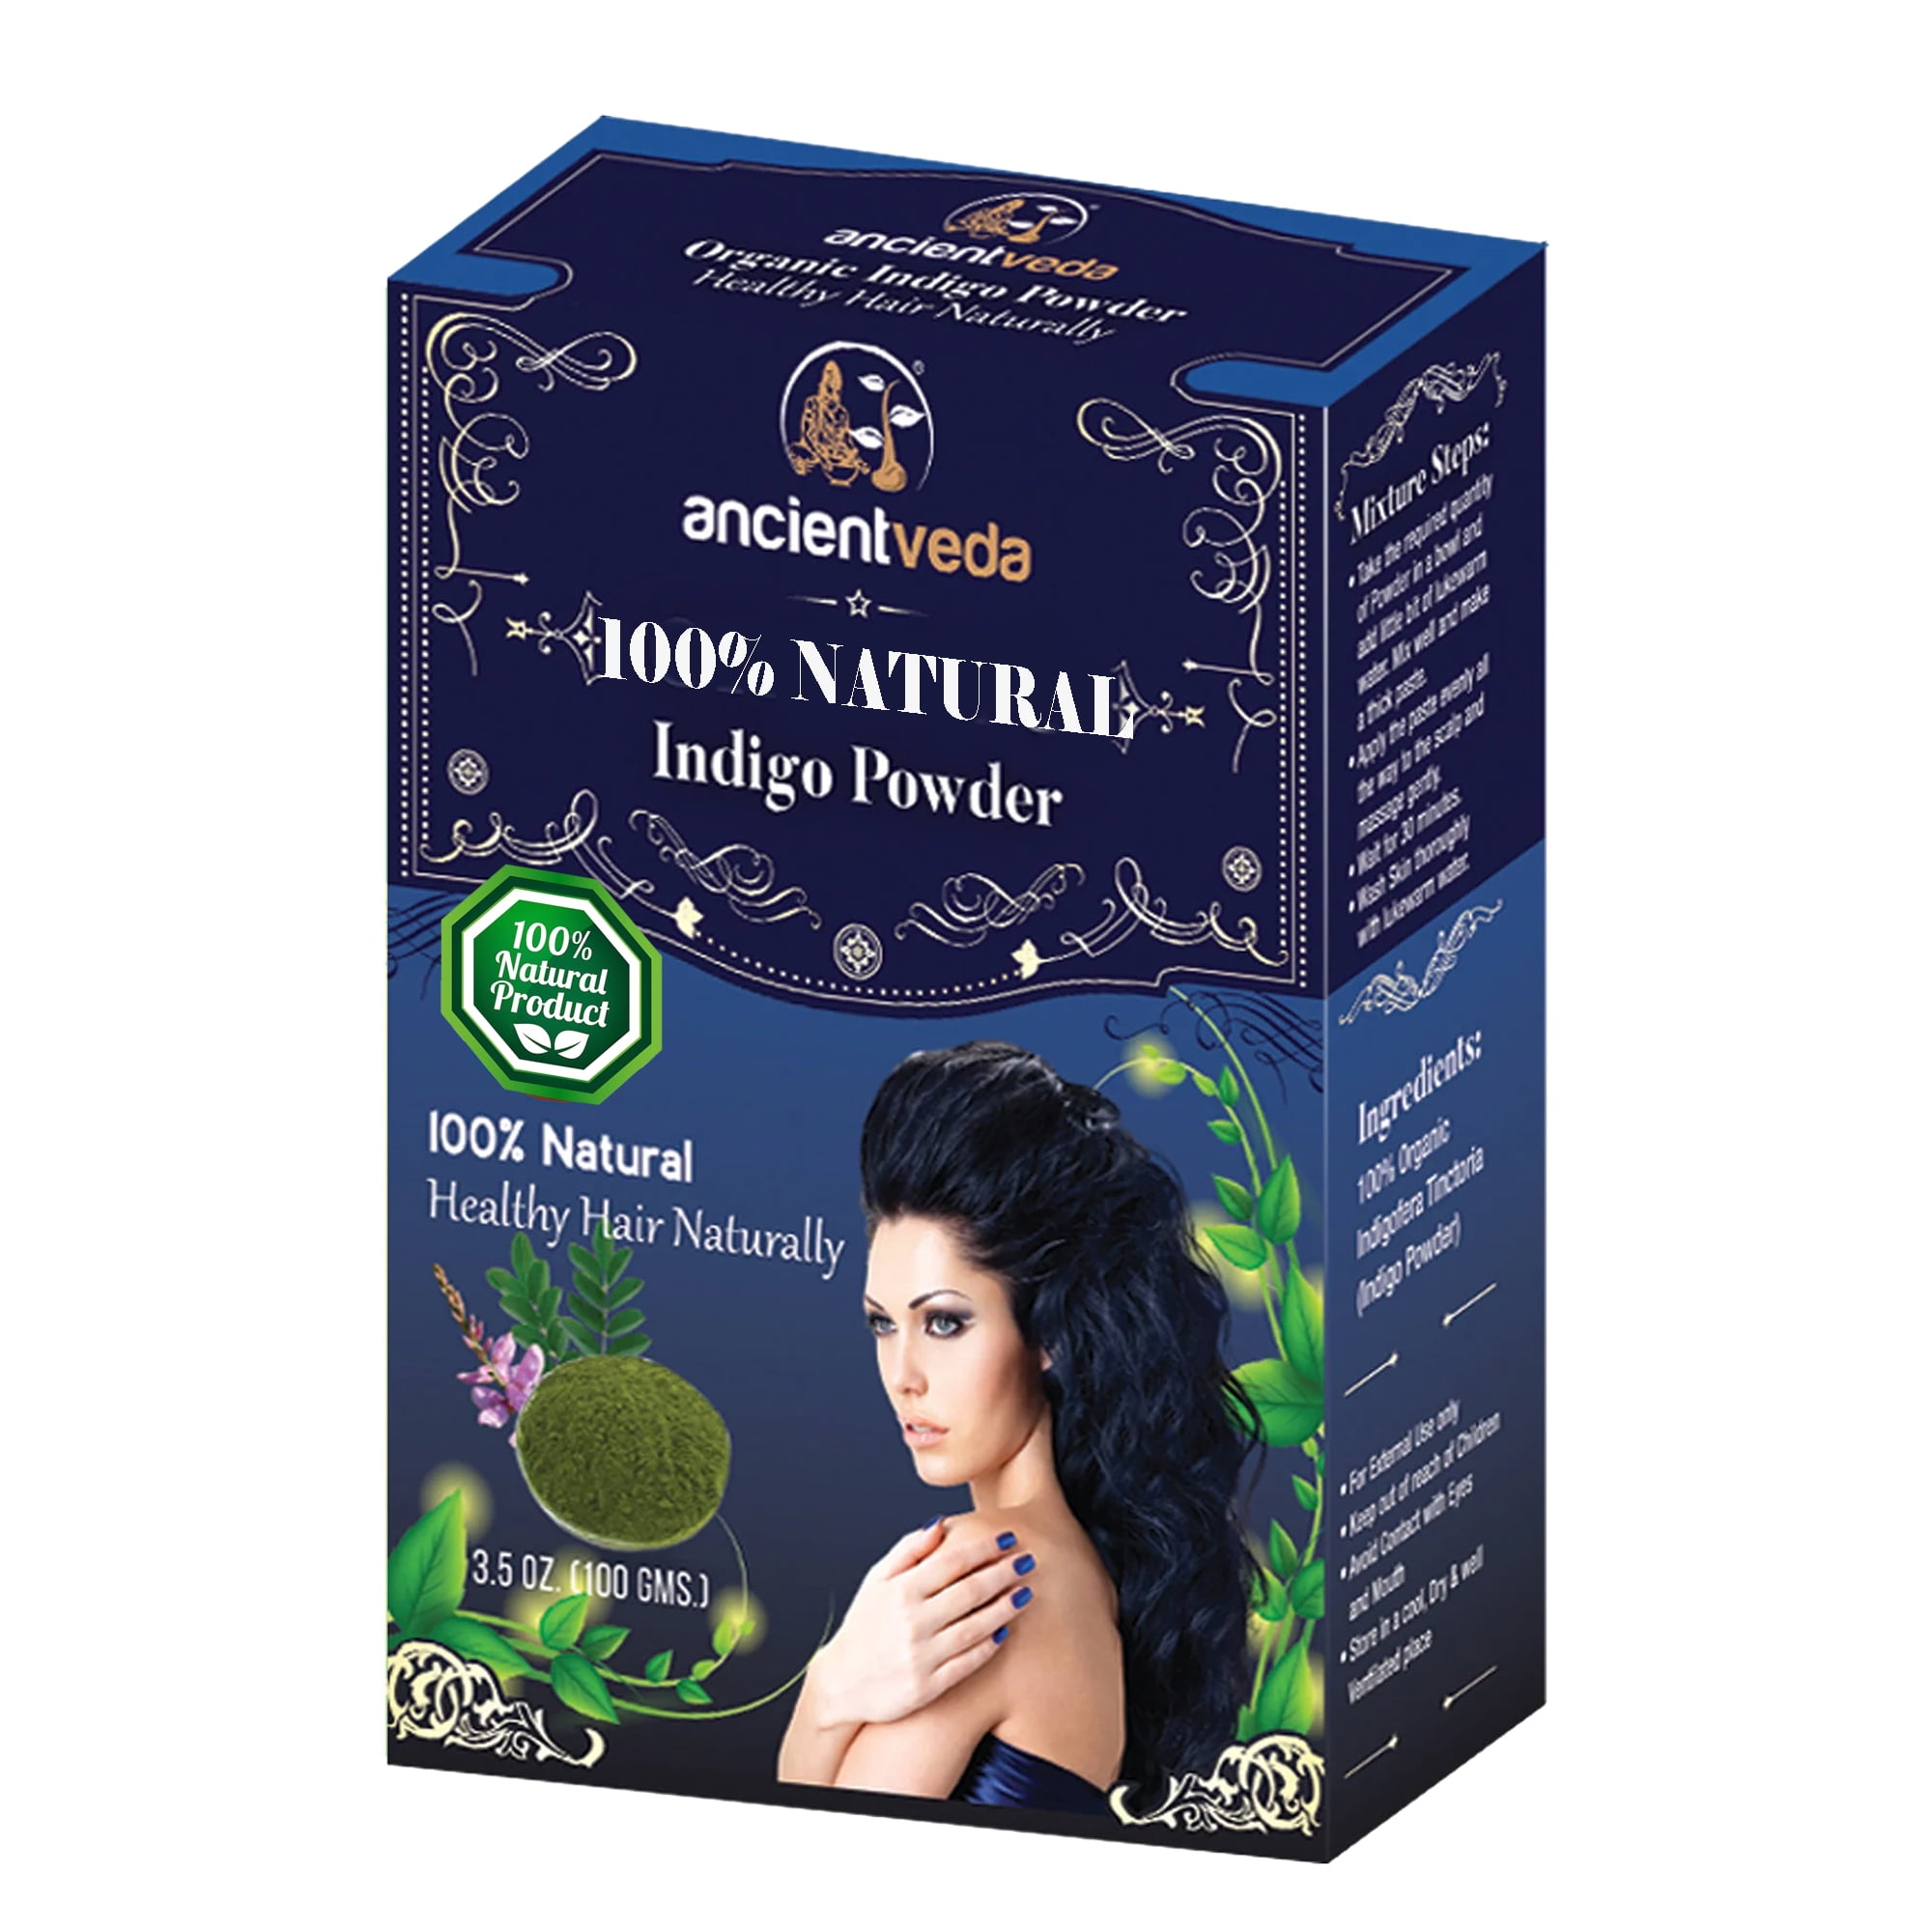 100% Natural Indigo Powder for Hair- 1 KG (2.2 LB) Value Pack - For  coloring hair from brown to black naturally